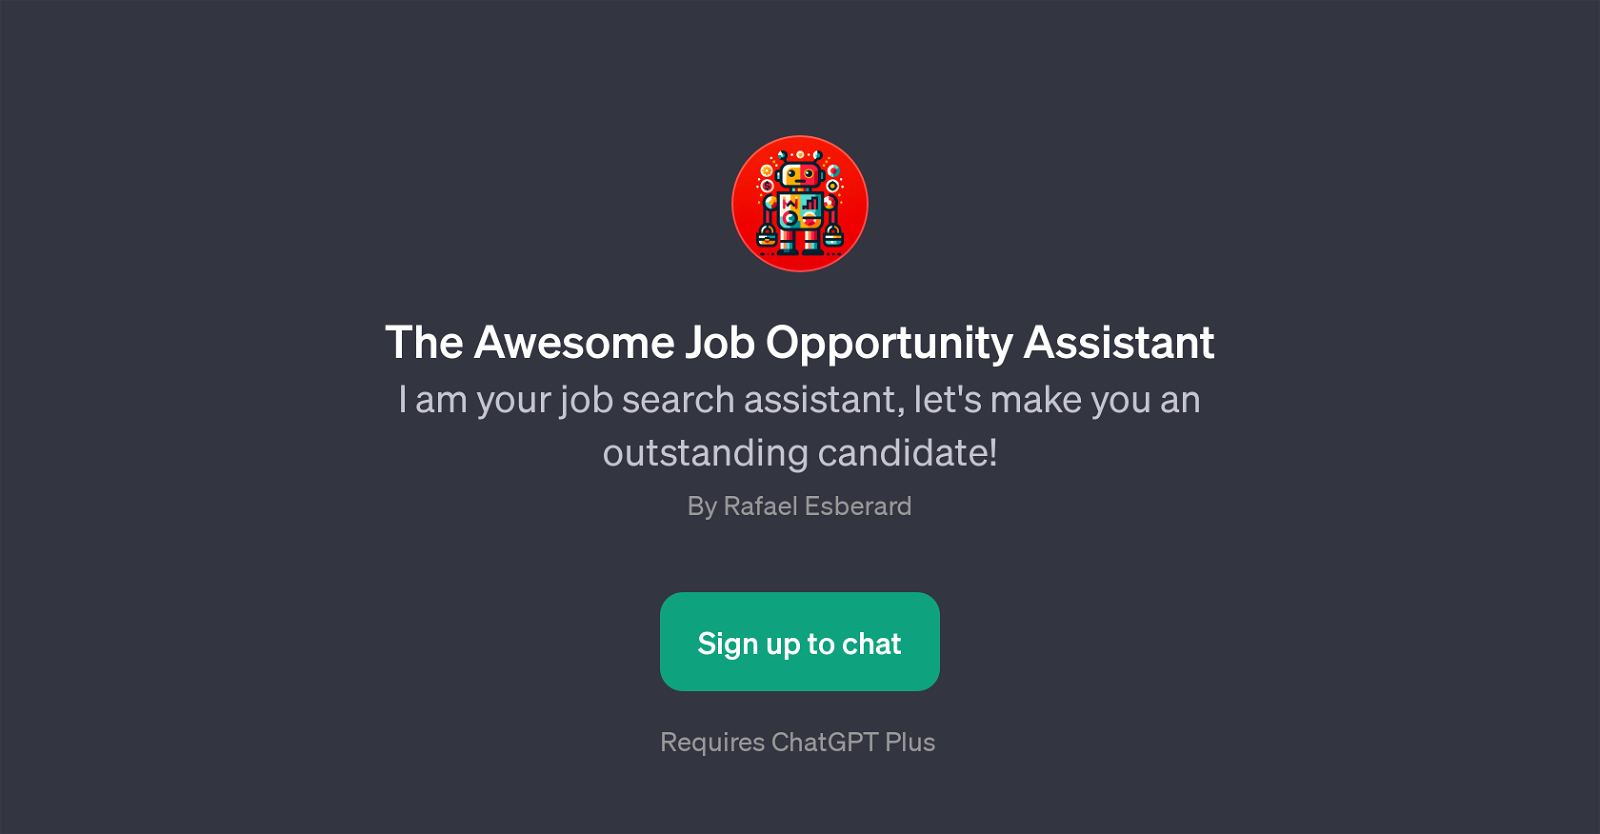 The Awesome Job Opportunity Assistant website